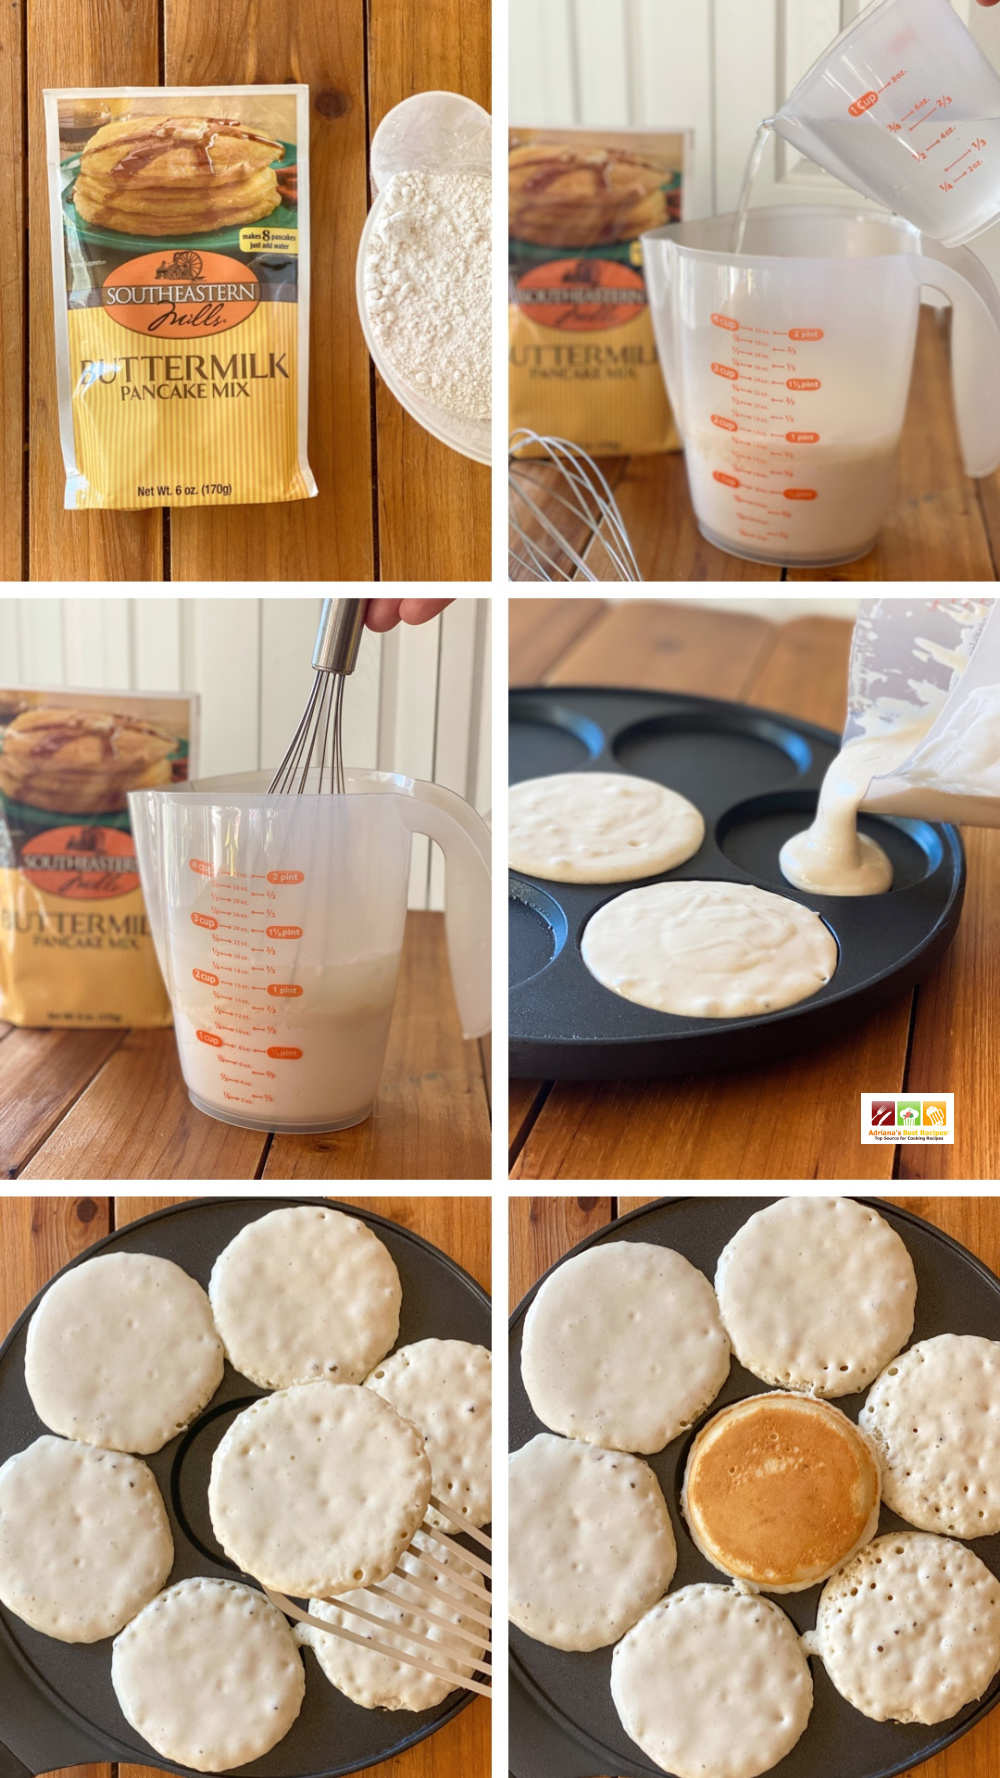 Showing the step by step on how to make the mini hotcakes. 